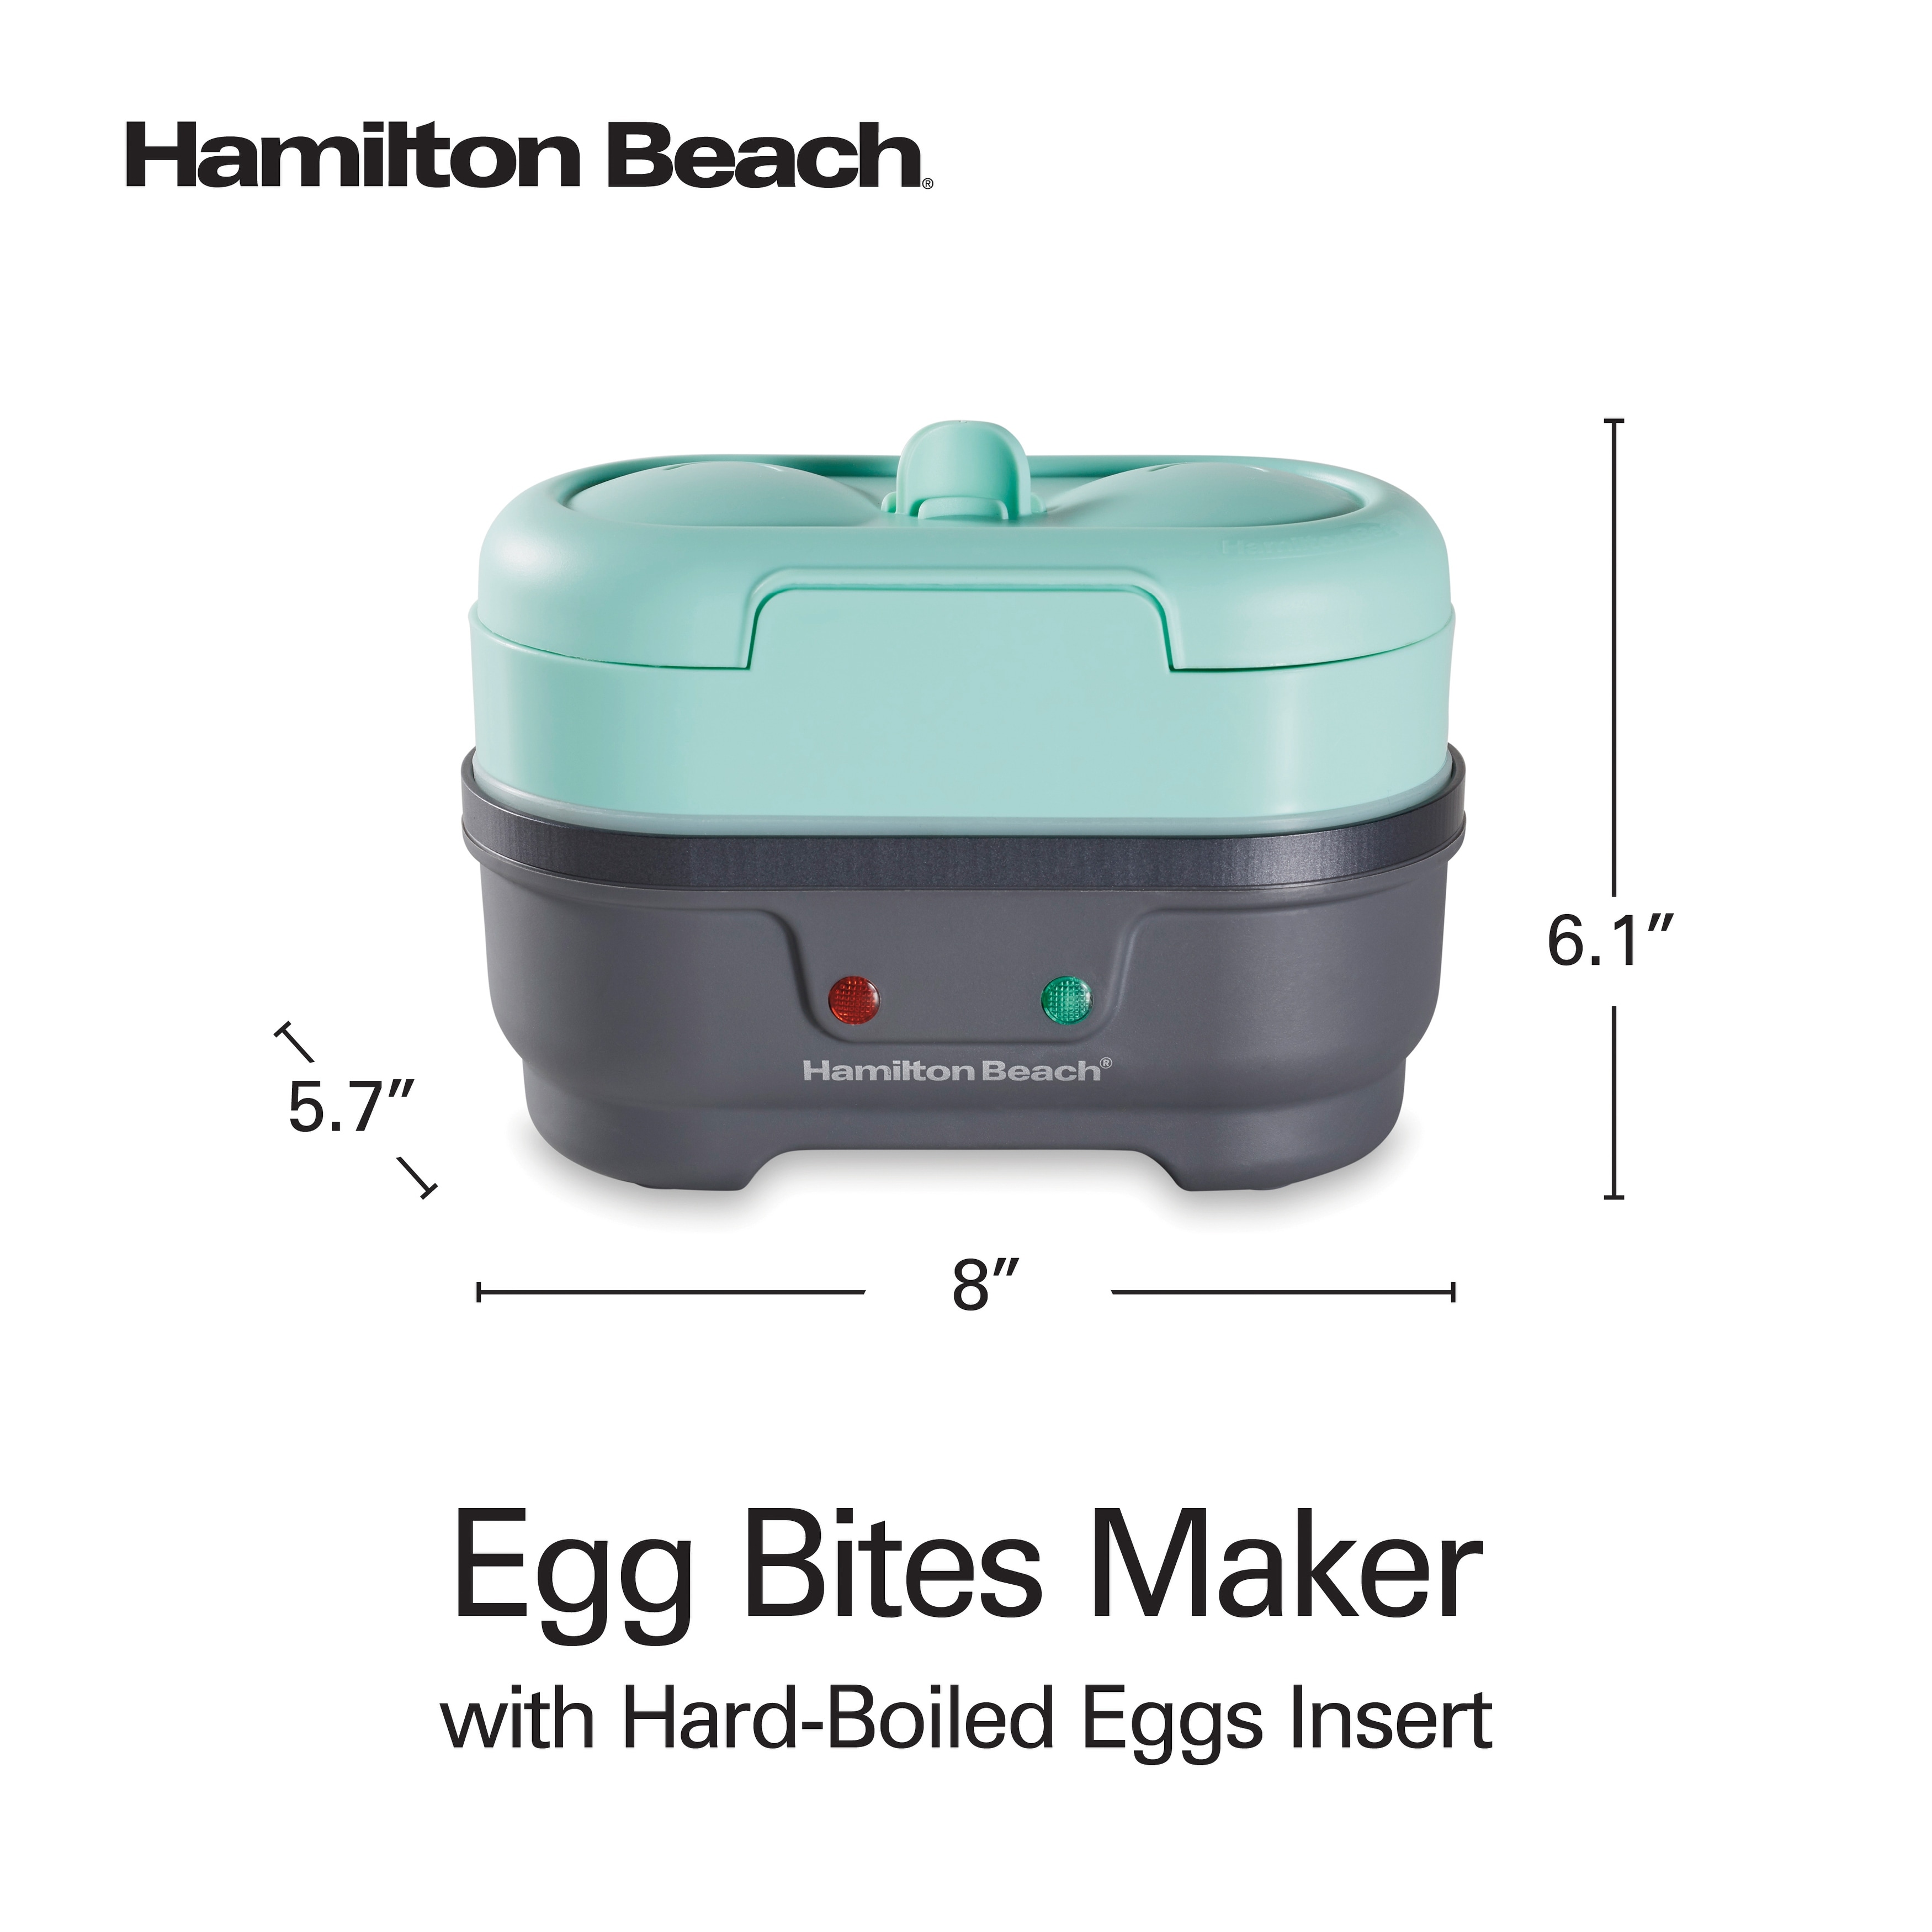 https://ak1.ostkcdn.com/images/products/is/images/direct/74f1a998c864c58dff7f9a968717048d6e23037e/Hamilton-Beach-Egg-Bites-Maker-with-Hard-Boiled-Eggs-Insert.jpg